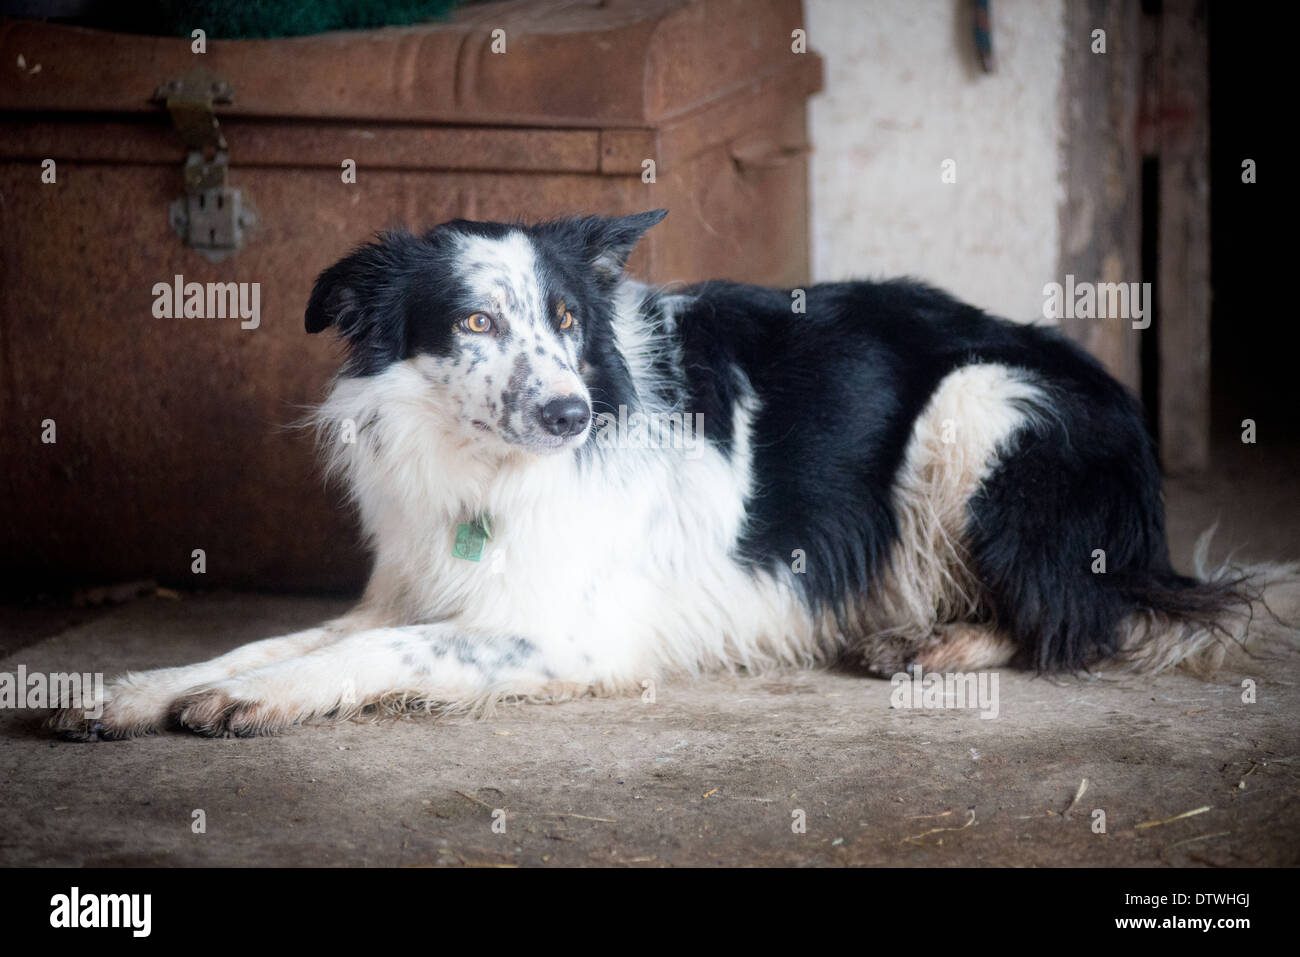 Border collie sheepdog sitting by old chest Stock Photo